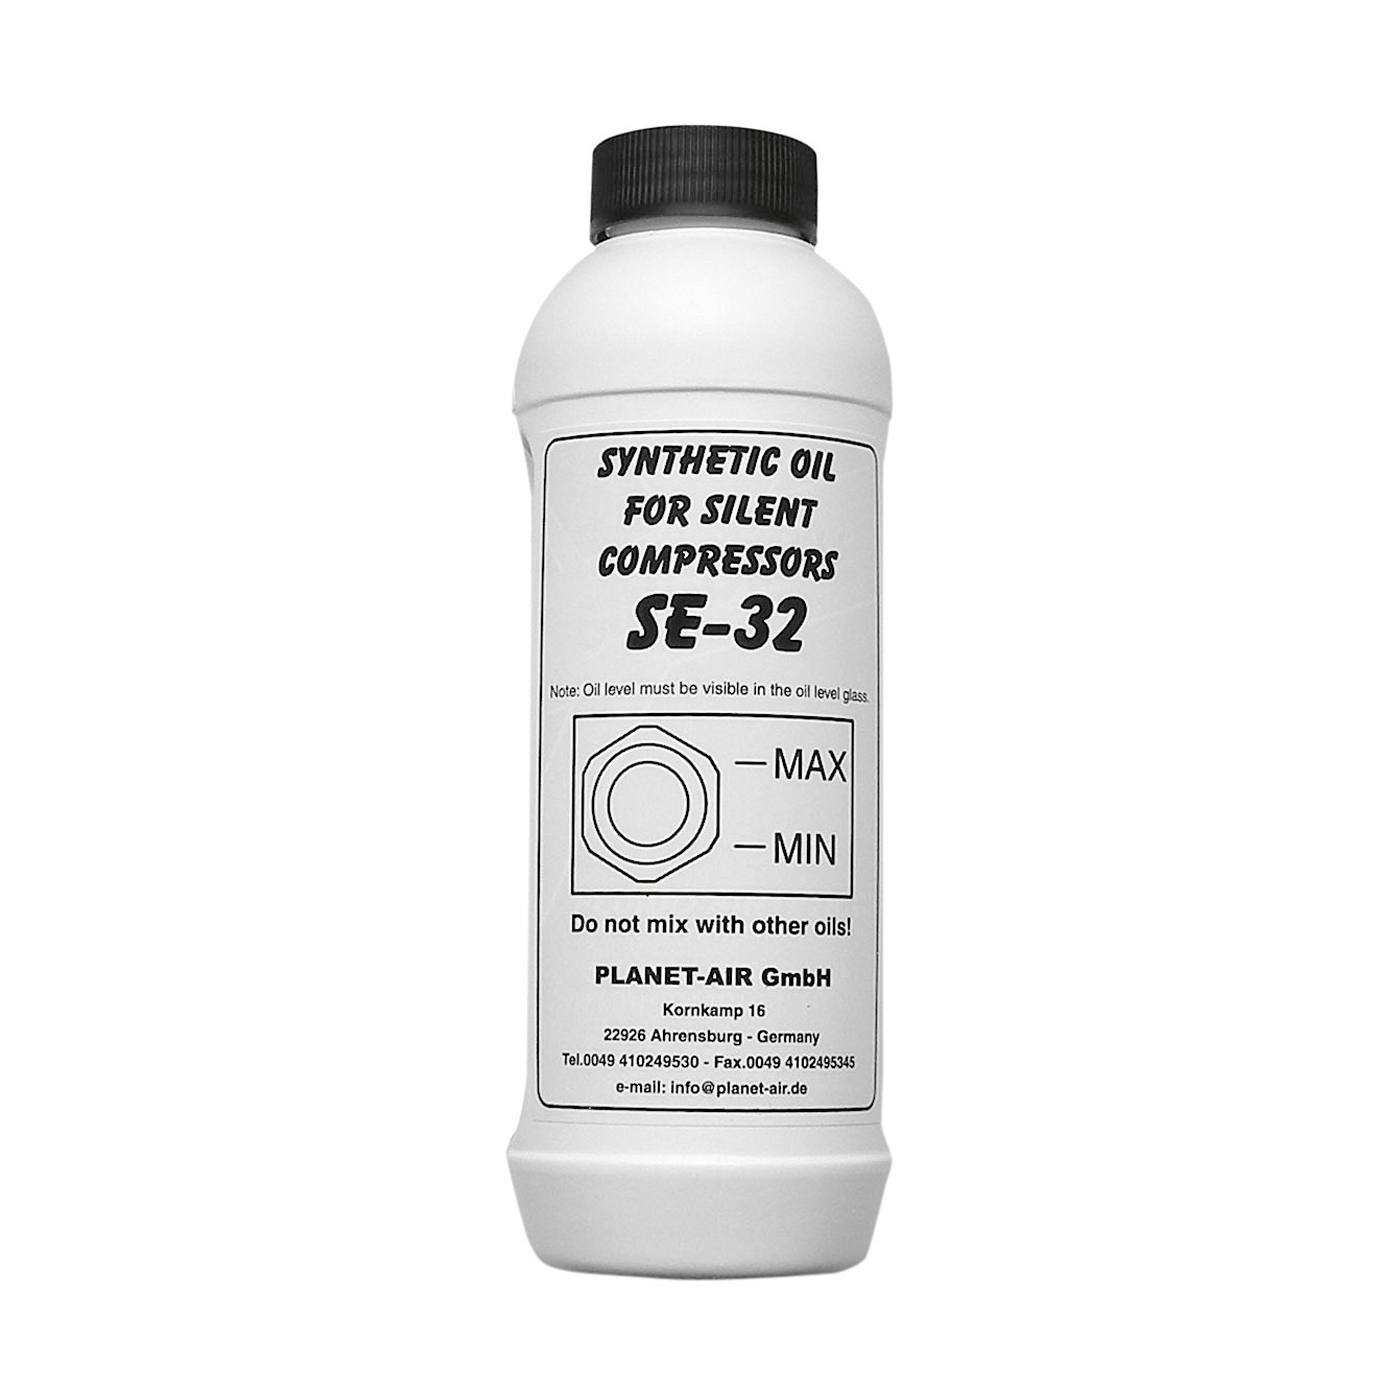 SE-32 Synthetic Oil, for Compressors - 500 ml